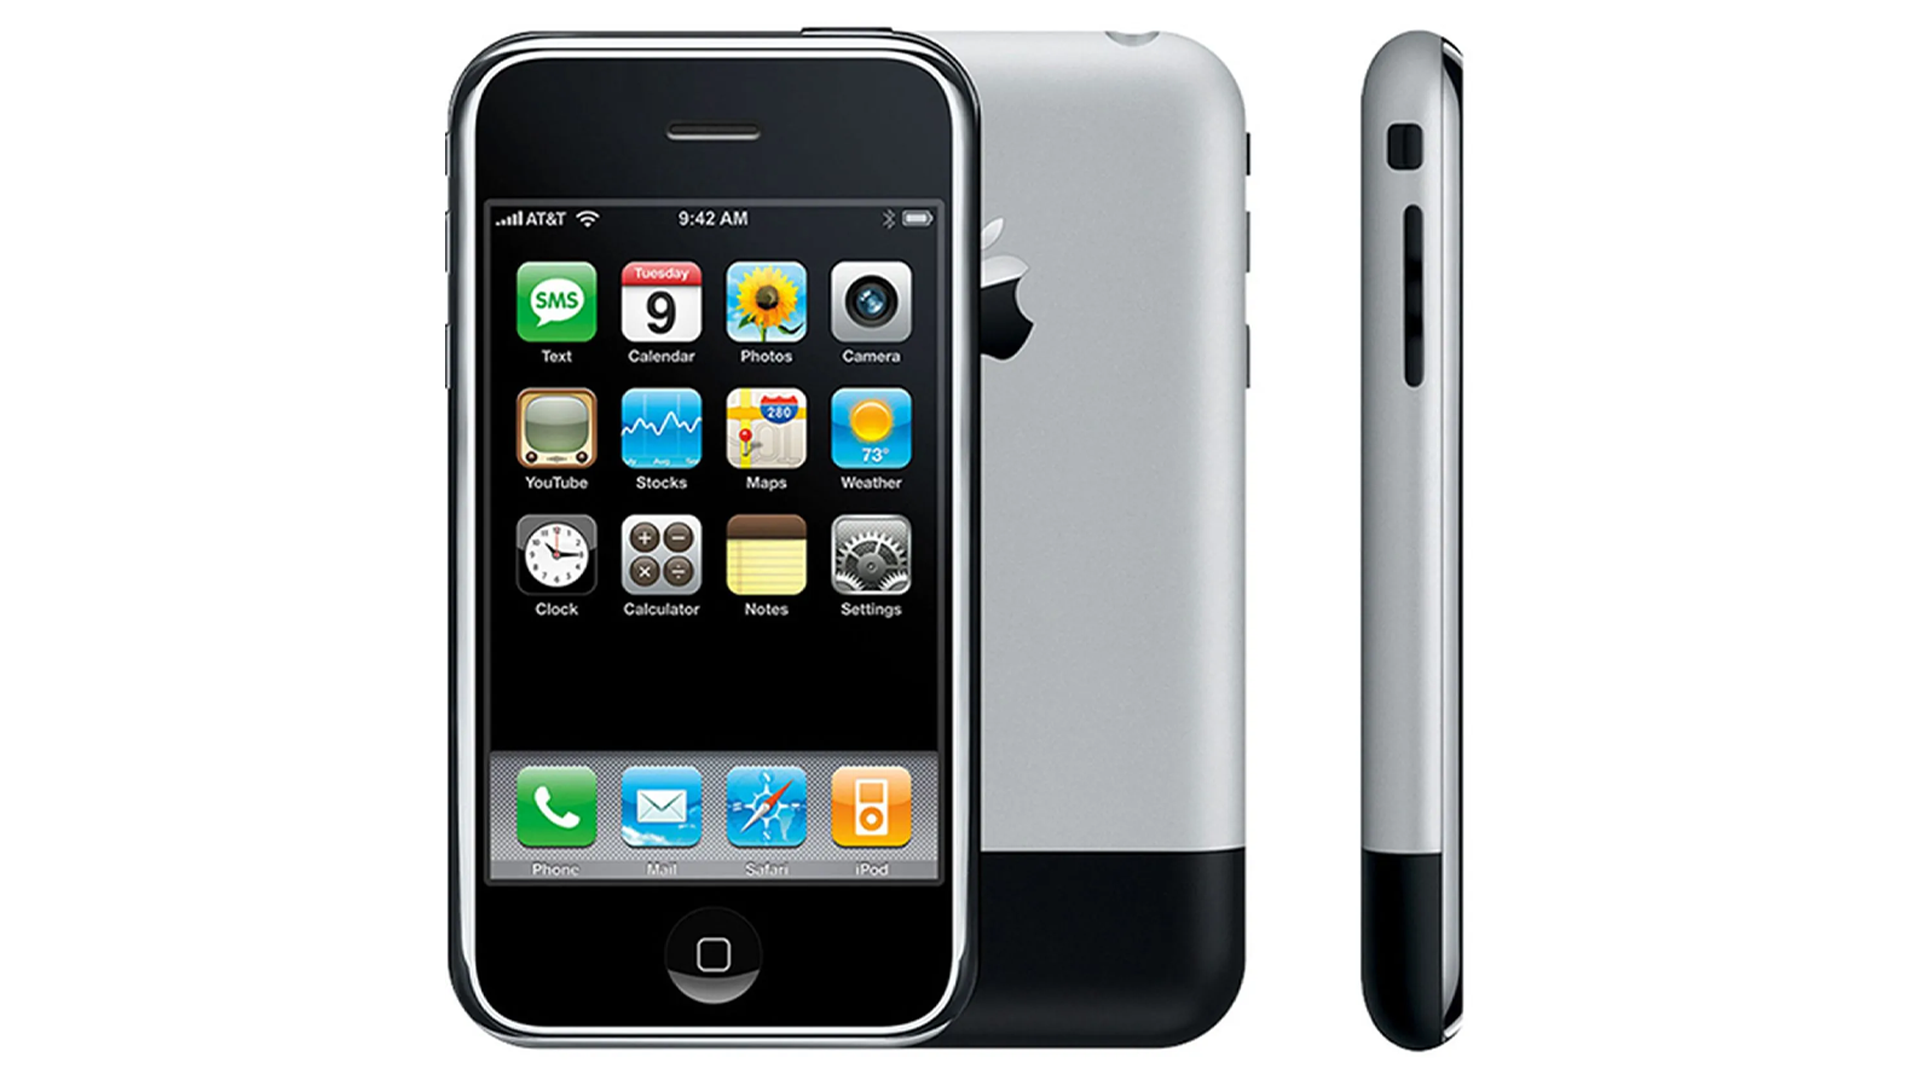 iPhone 2G from 2007